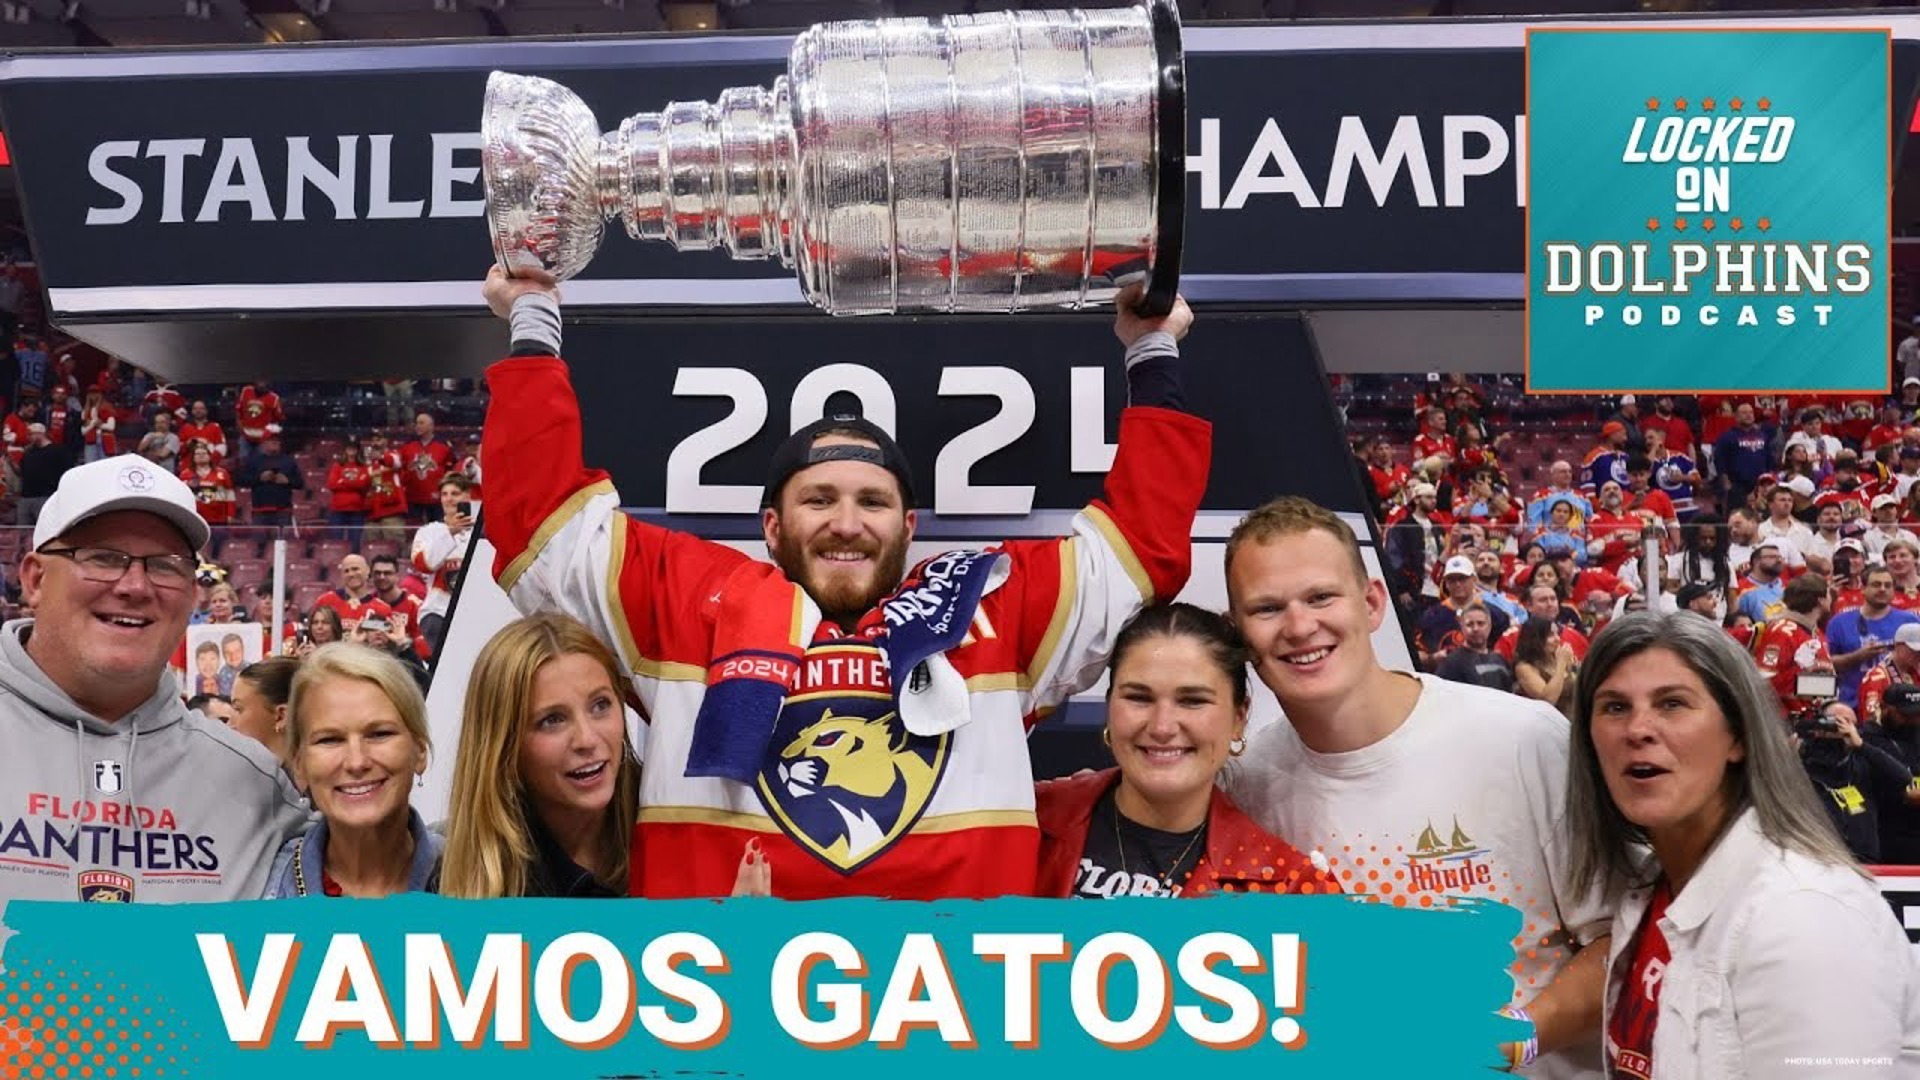 The South Florida sports scene welcomes a new champion — the Florida Panthers are Stanley Cup champions! But the journey has been long, complex and trying.